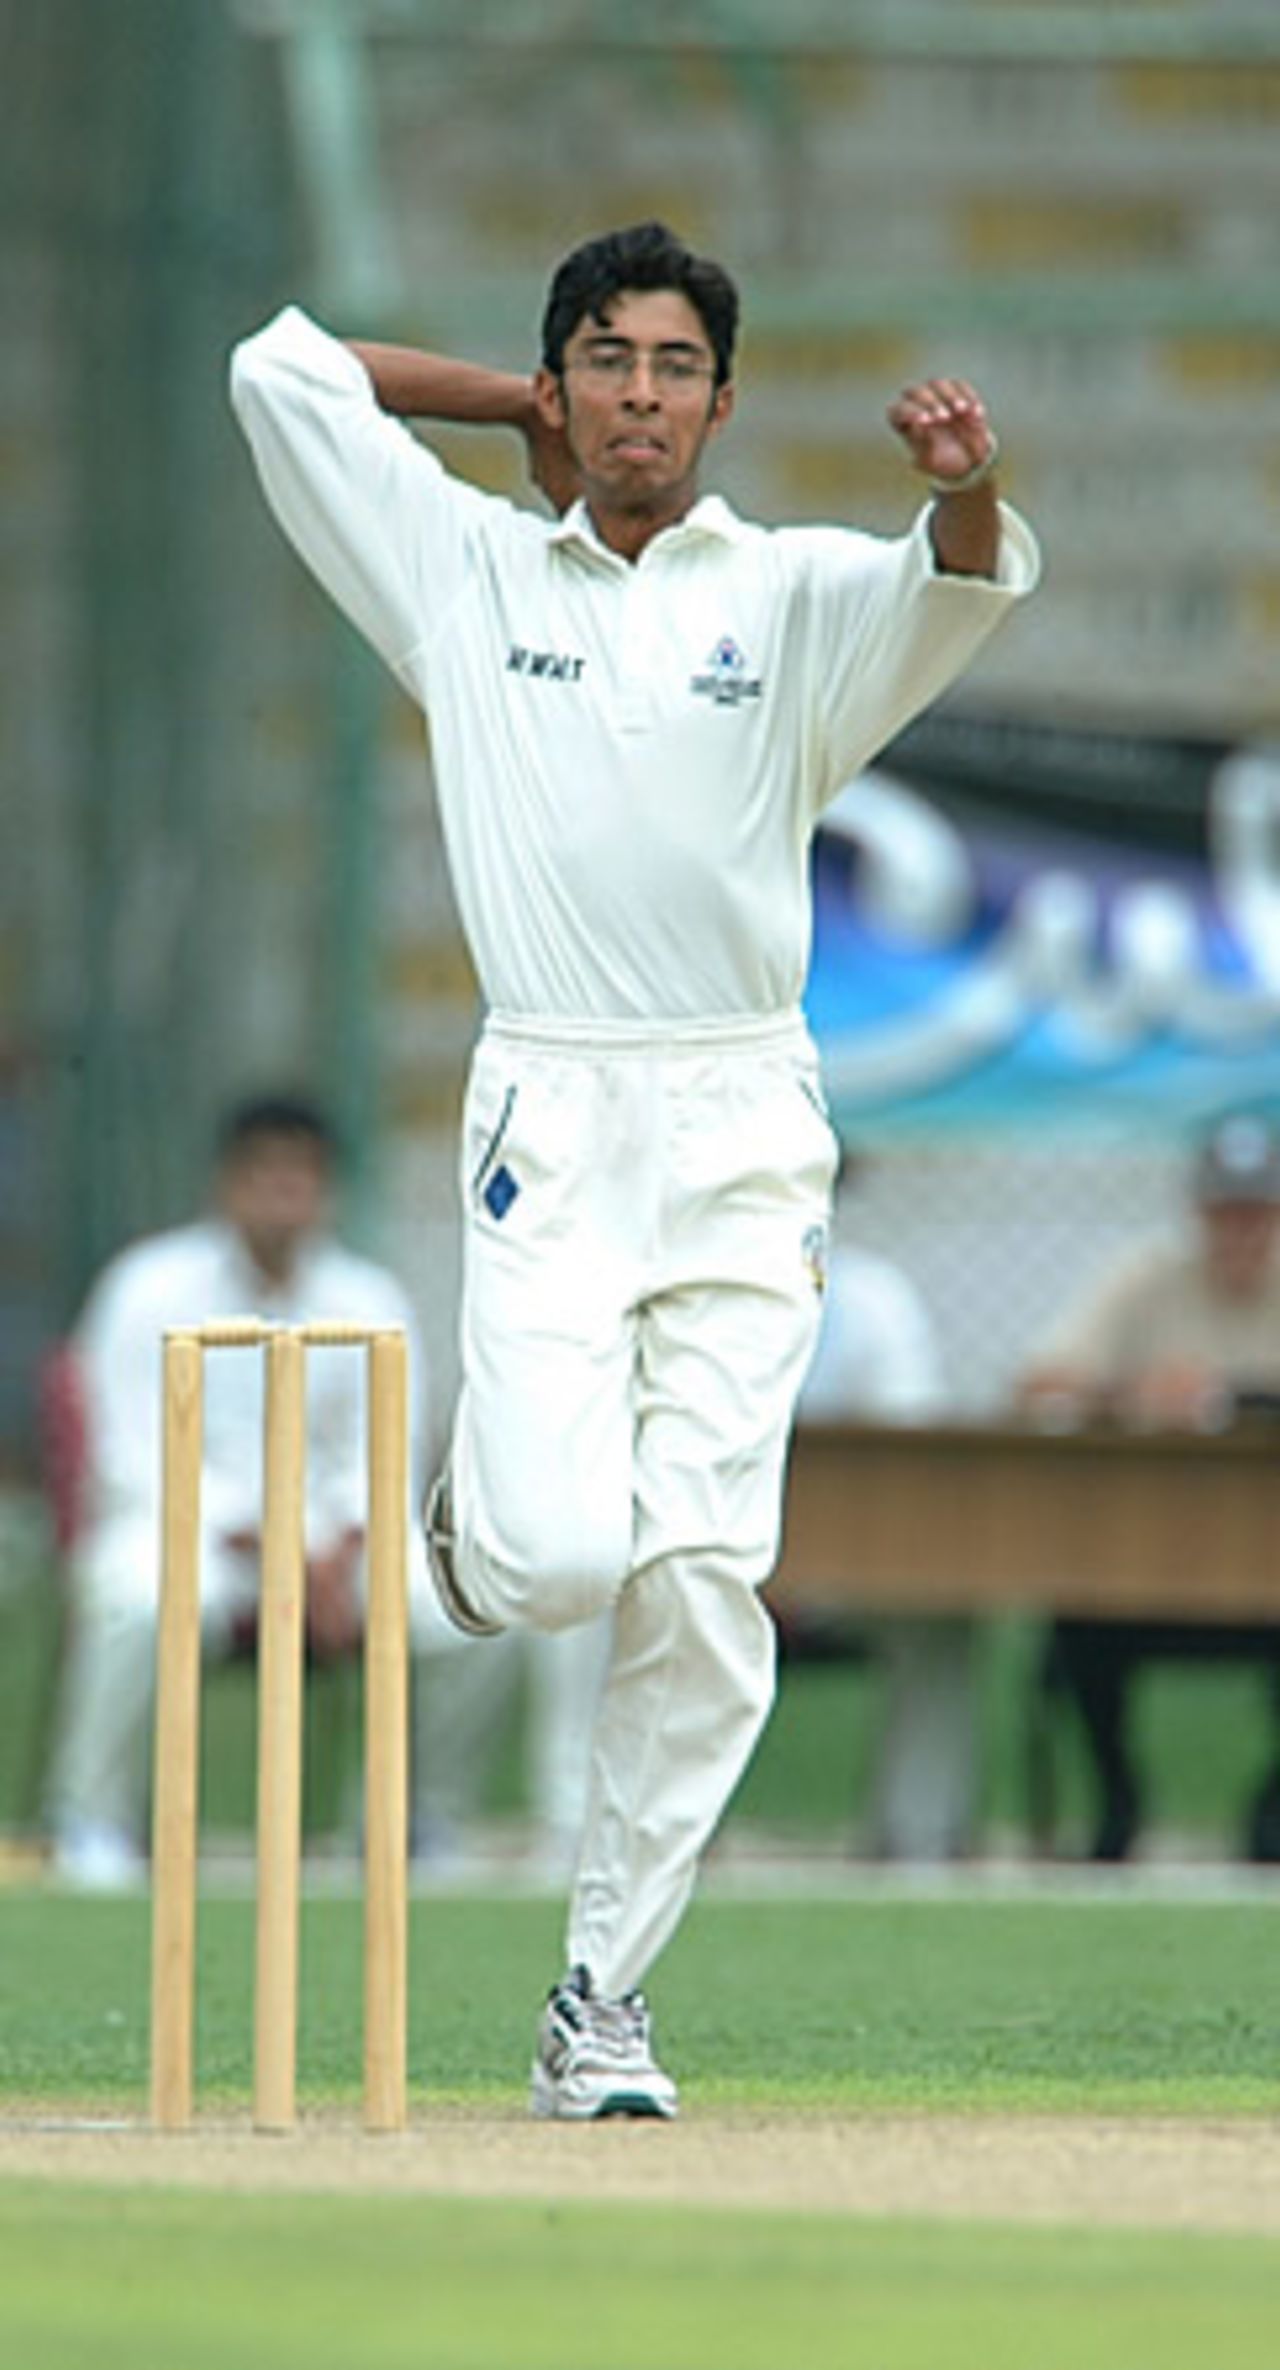 Waqas Jamil of Kuwait during his 3-wicket spell, 1st Semi Final: Kuwait Under-19s v Nepal Under-19s at National Stadium, Karachi, Youth Asia Cup 2003, 26 July 2003.